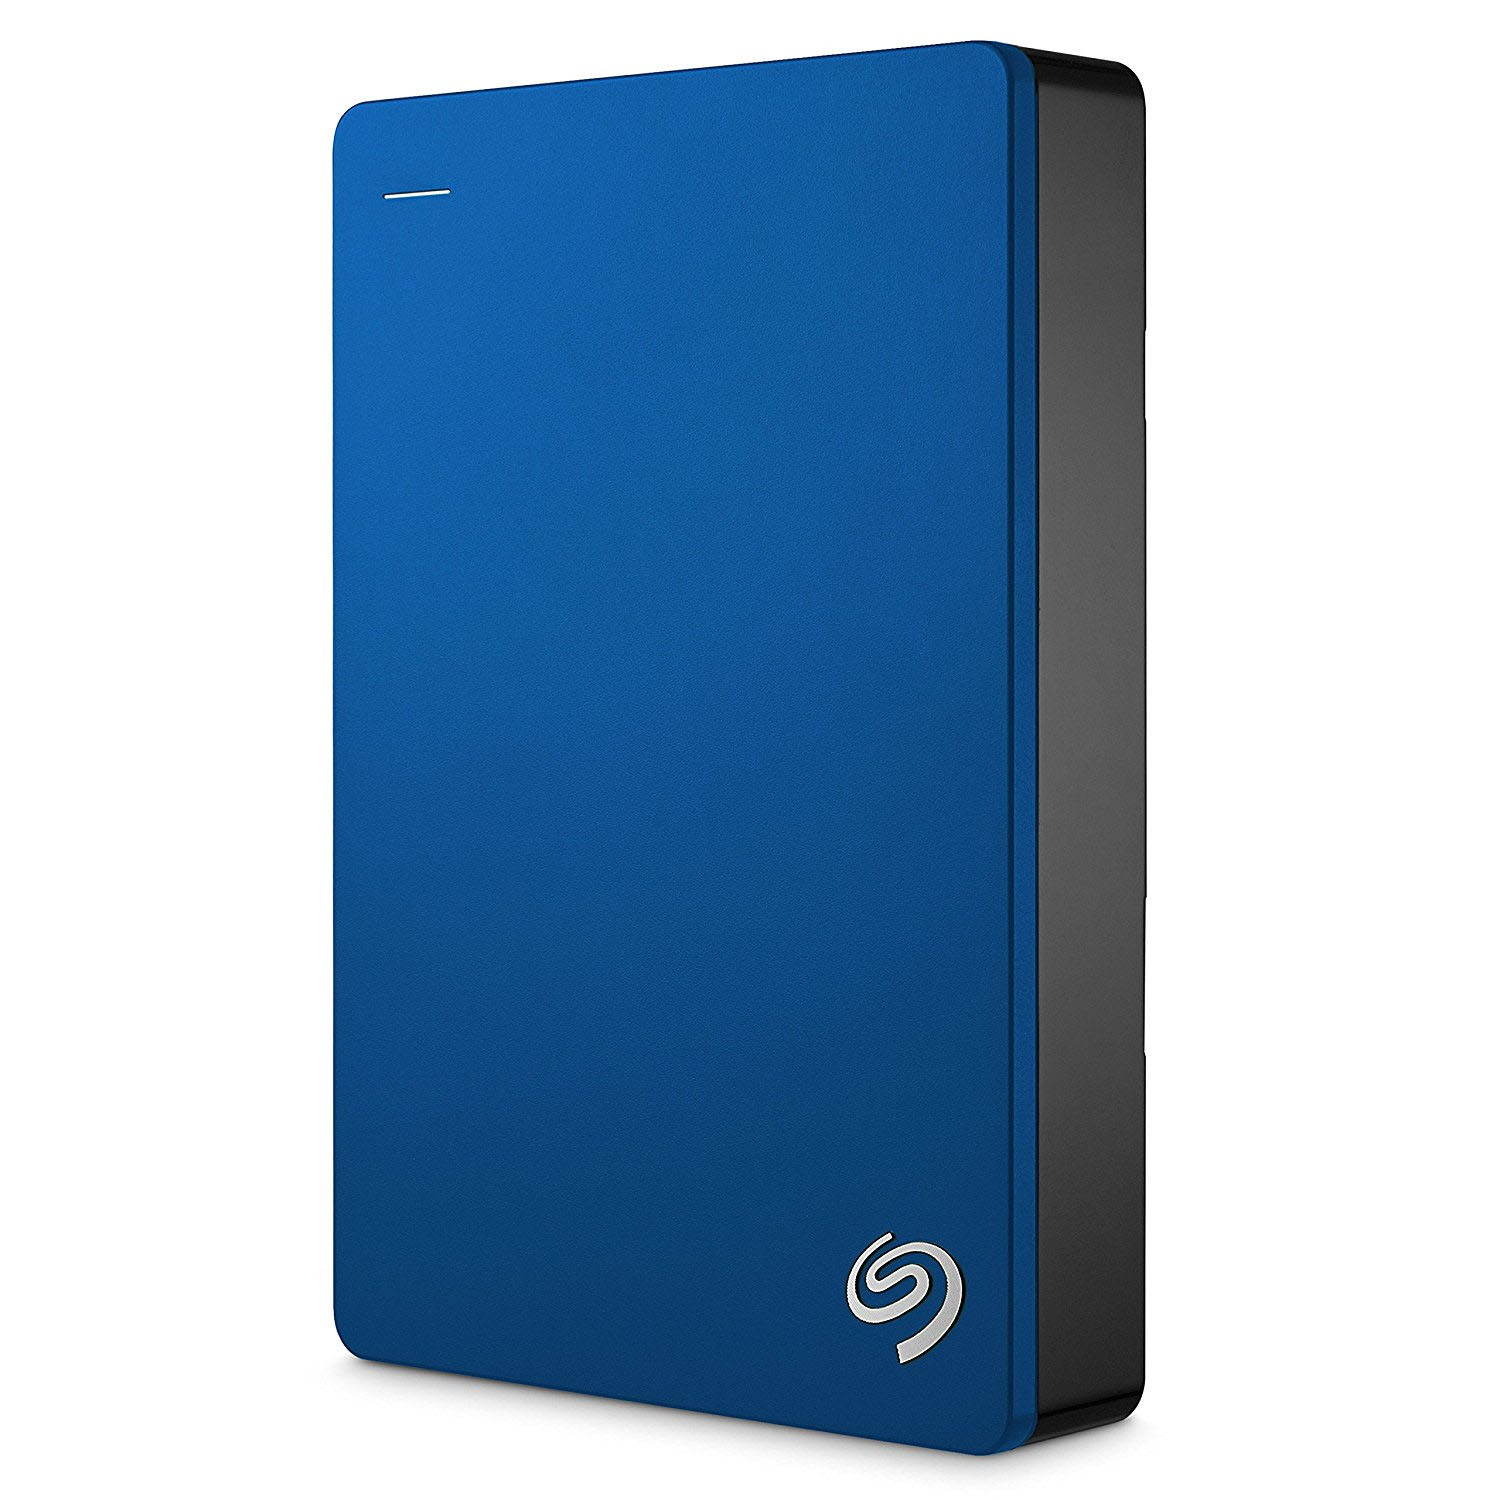 Seagate external hard drive recovery